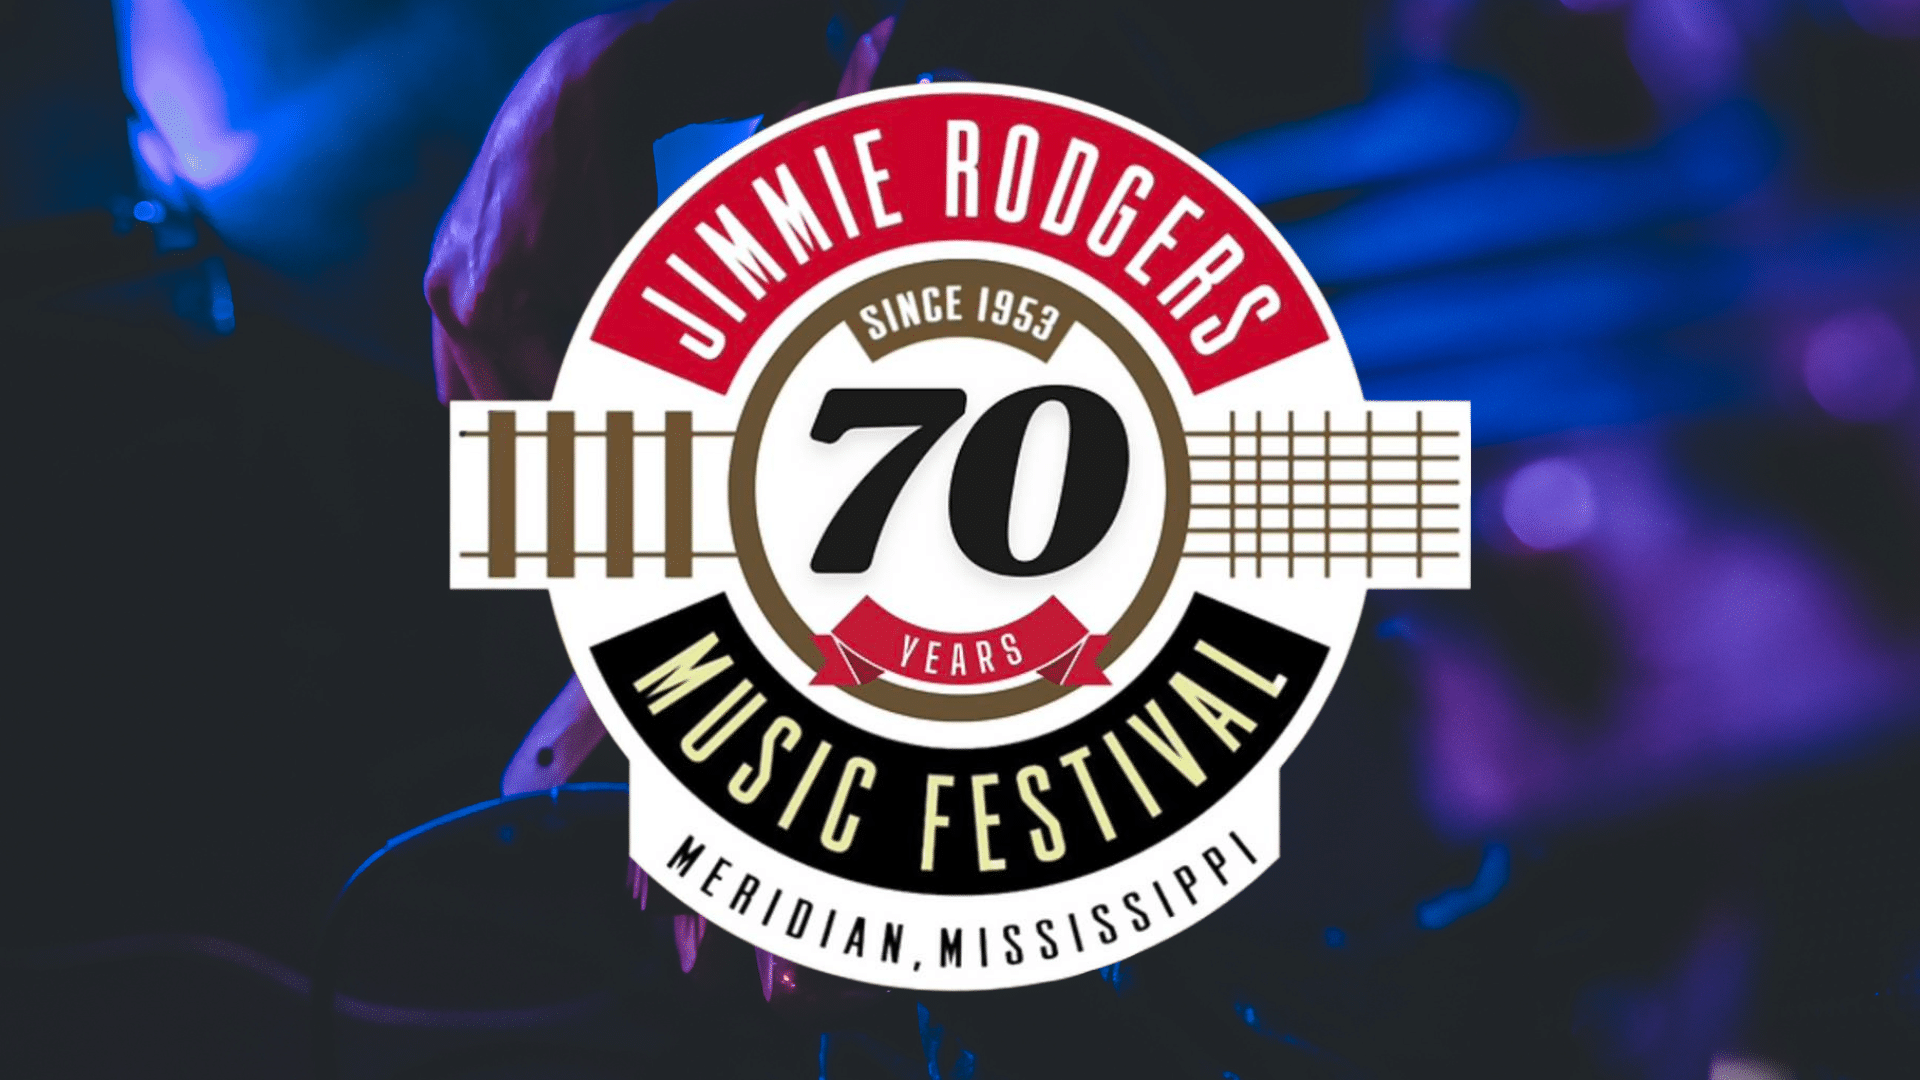 Jimmie Rodgers Music Festival kicks off this weekend SuperTalk